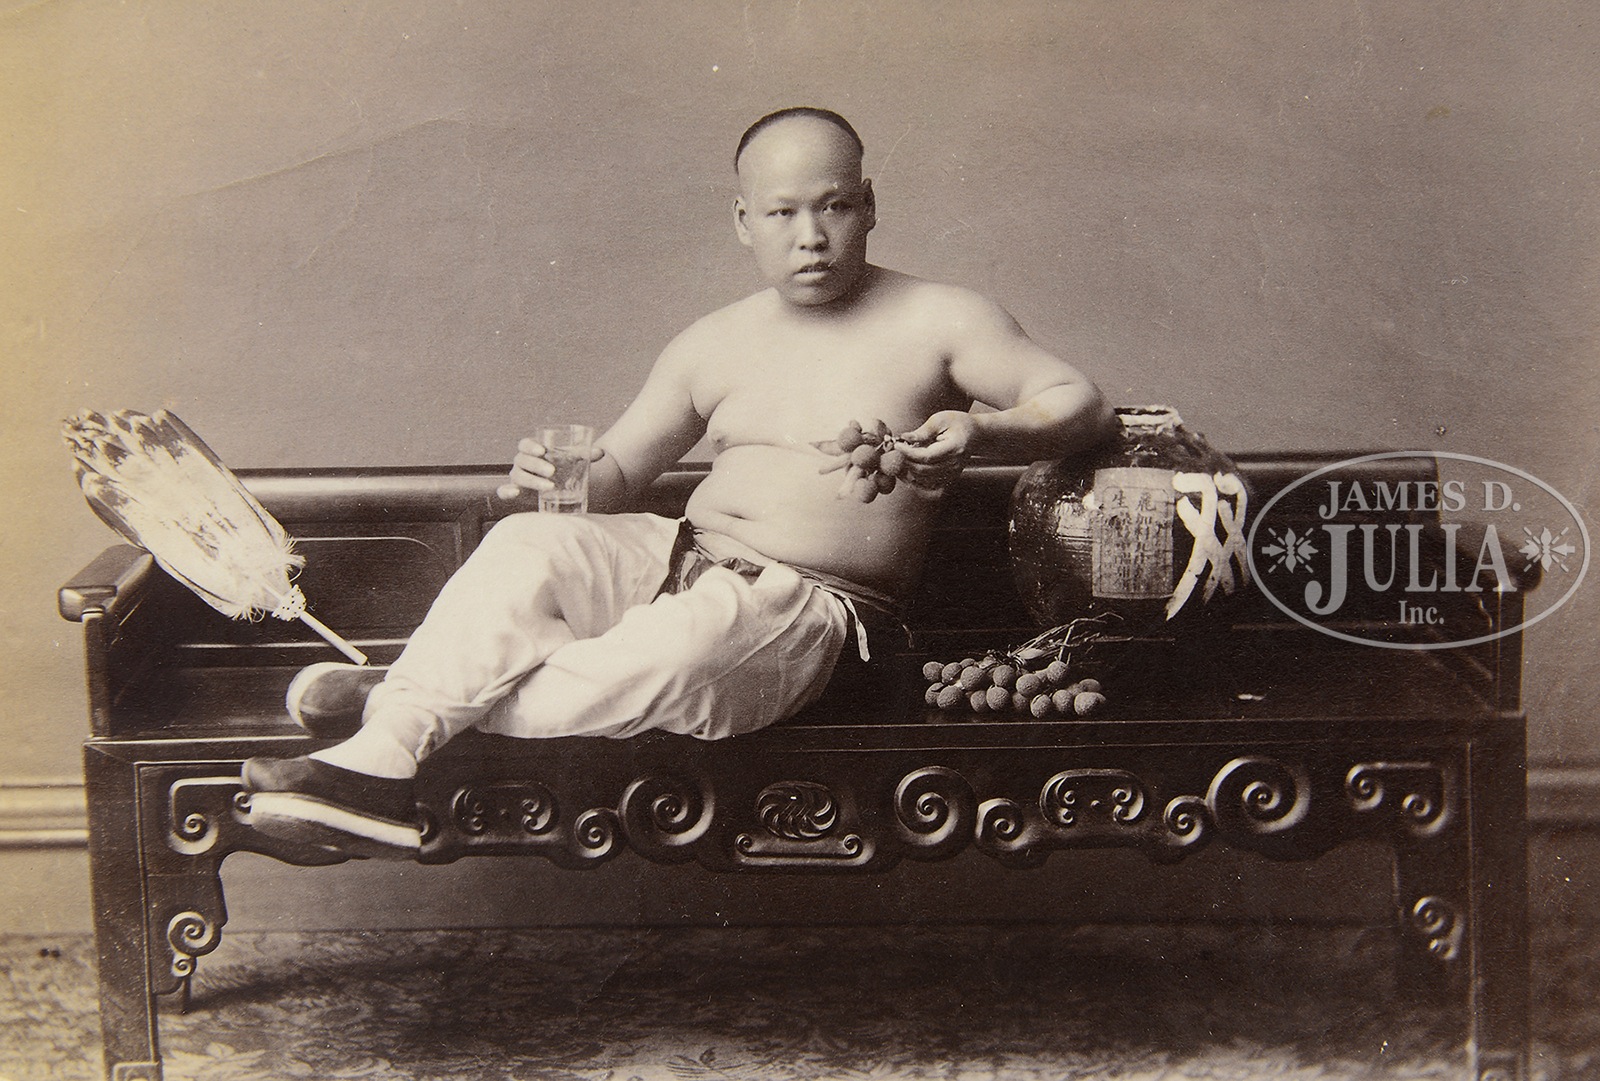 EXTRAORDINARY & MASSIVE LIFE LONG COLLECTION OF RARE ASIAN PHOTOGRAPHS AMASSED BY DR. HELGA WALL- - Image 165 of 222